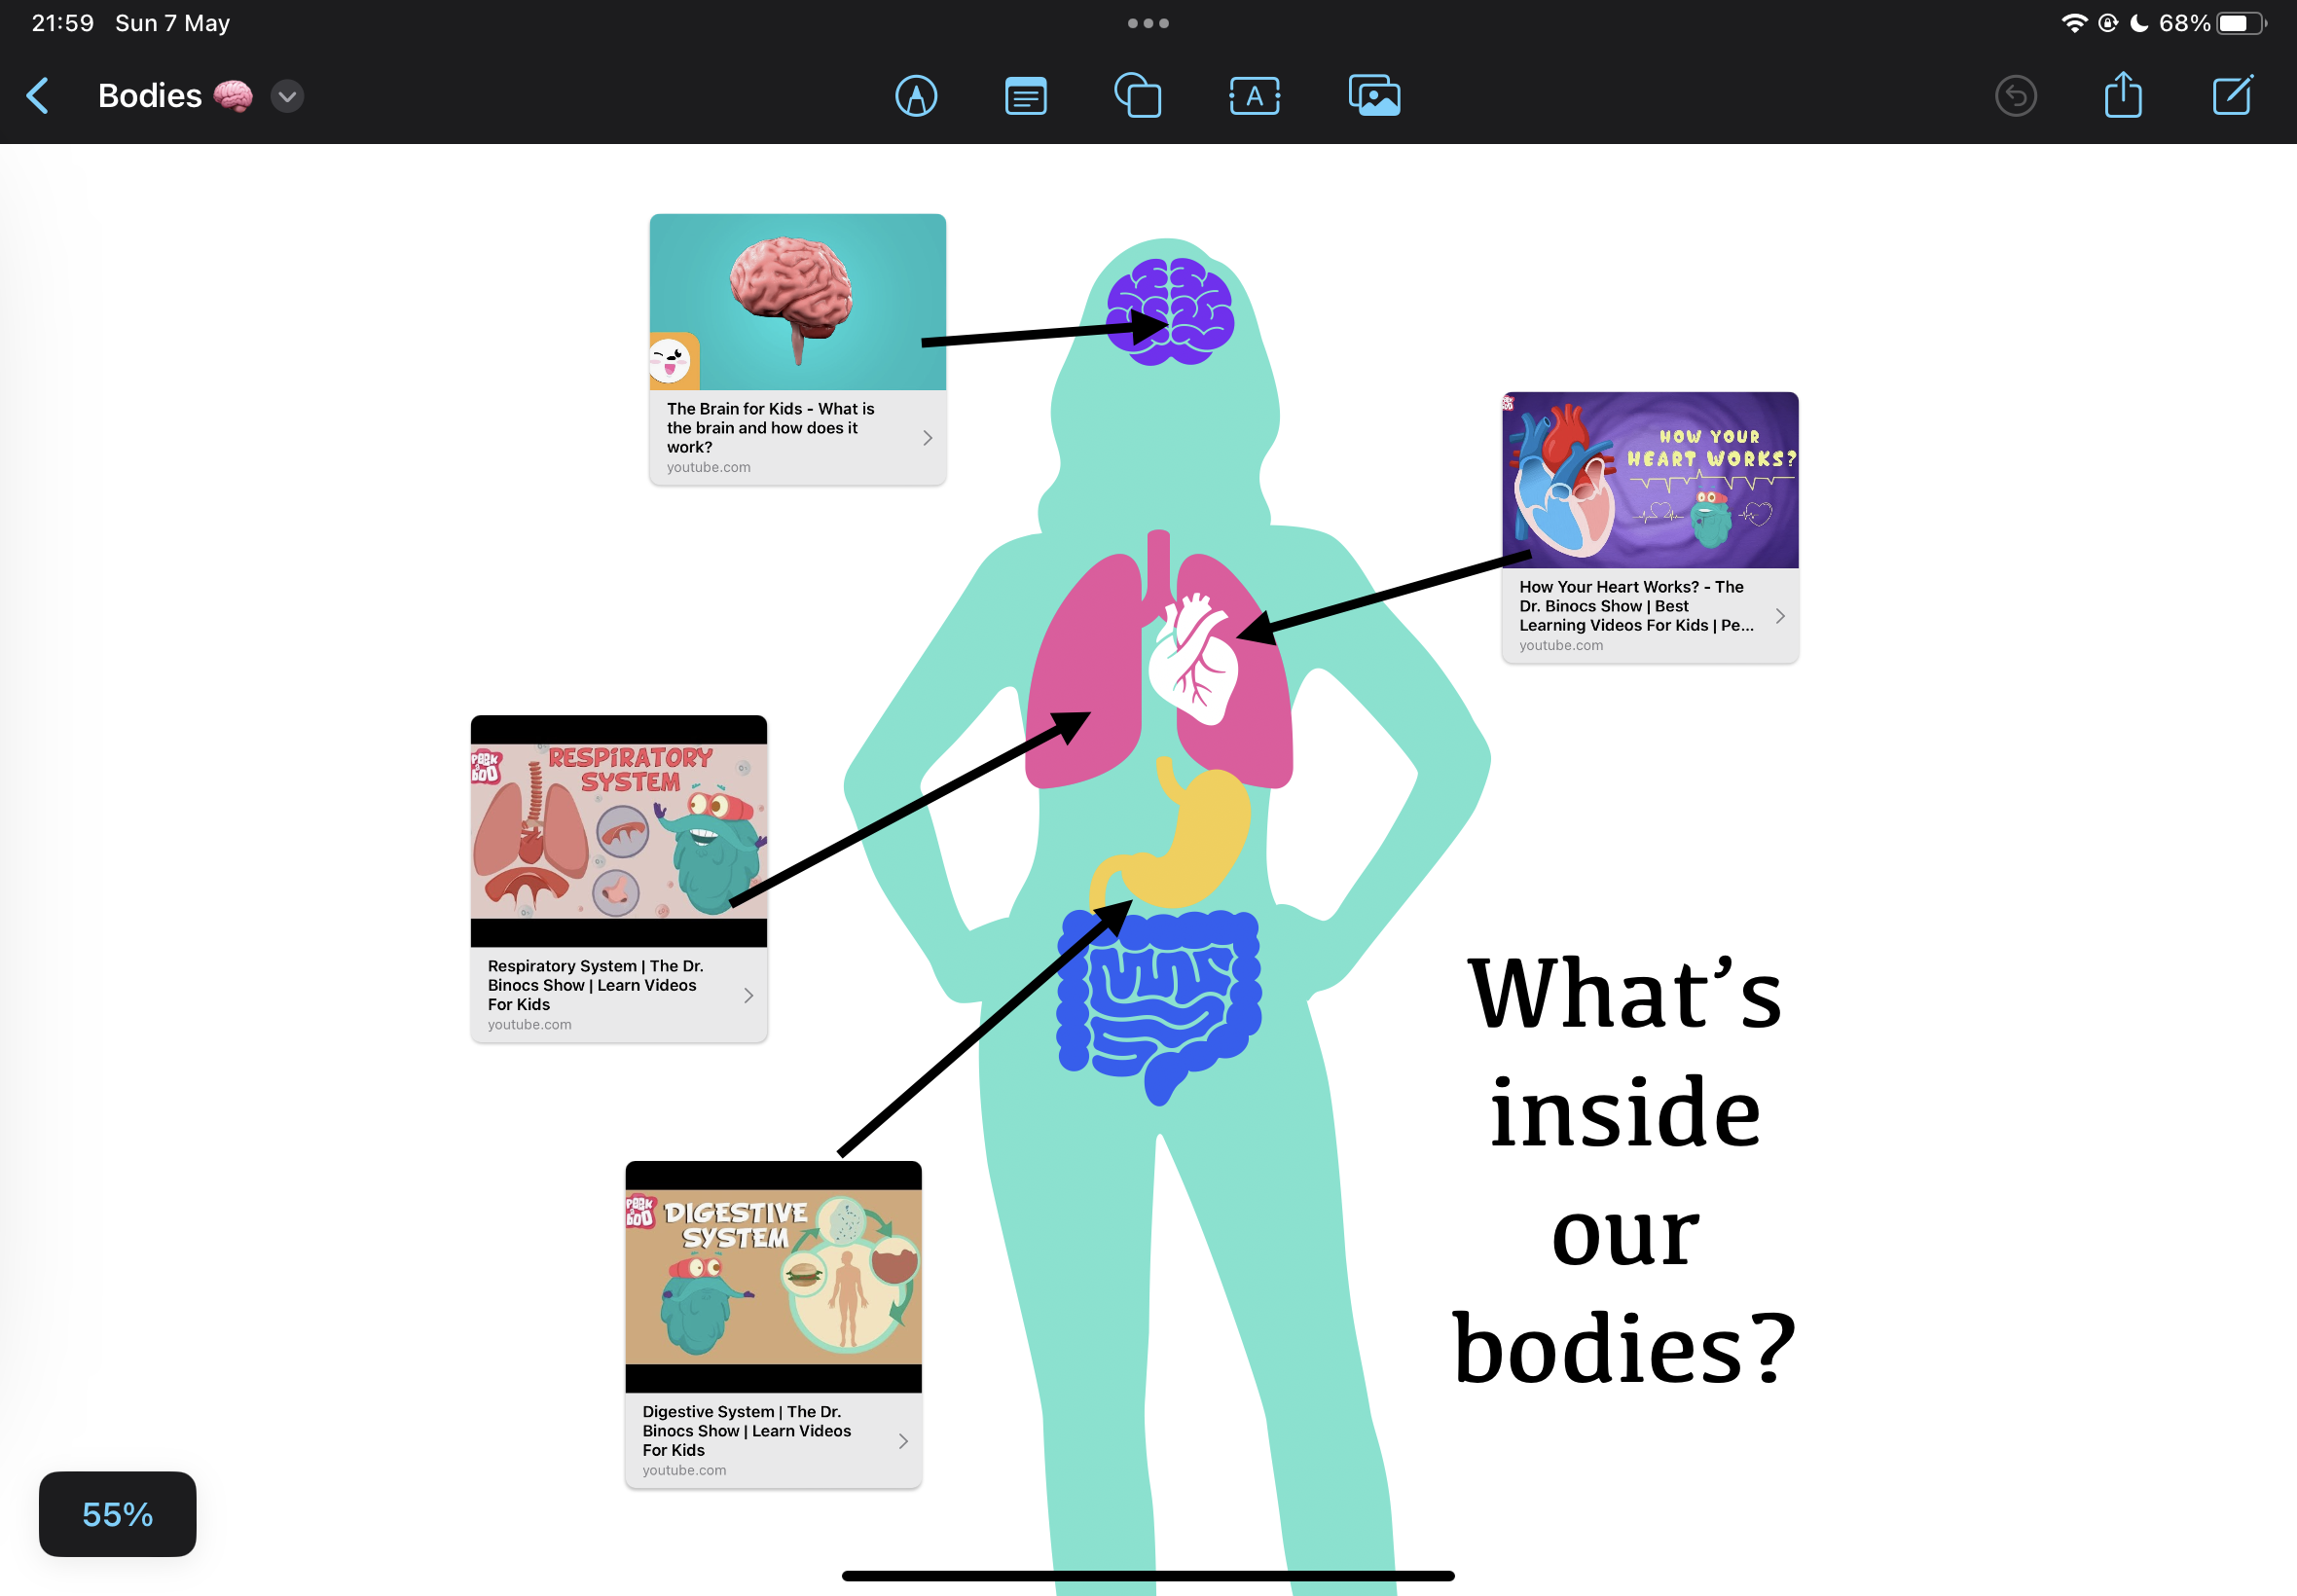 A Freeform board with a human body diagram and YouTube videos linked to different body parts